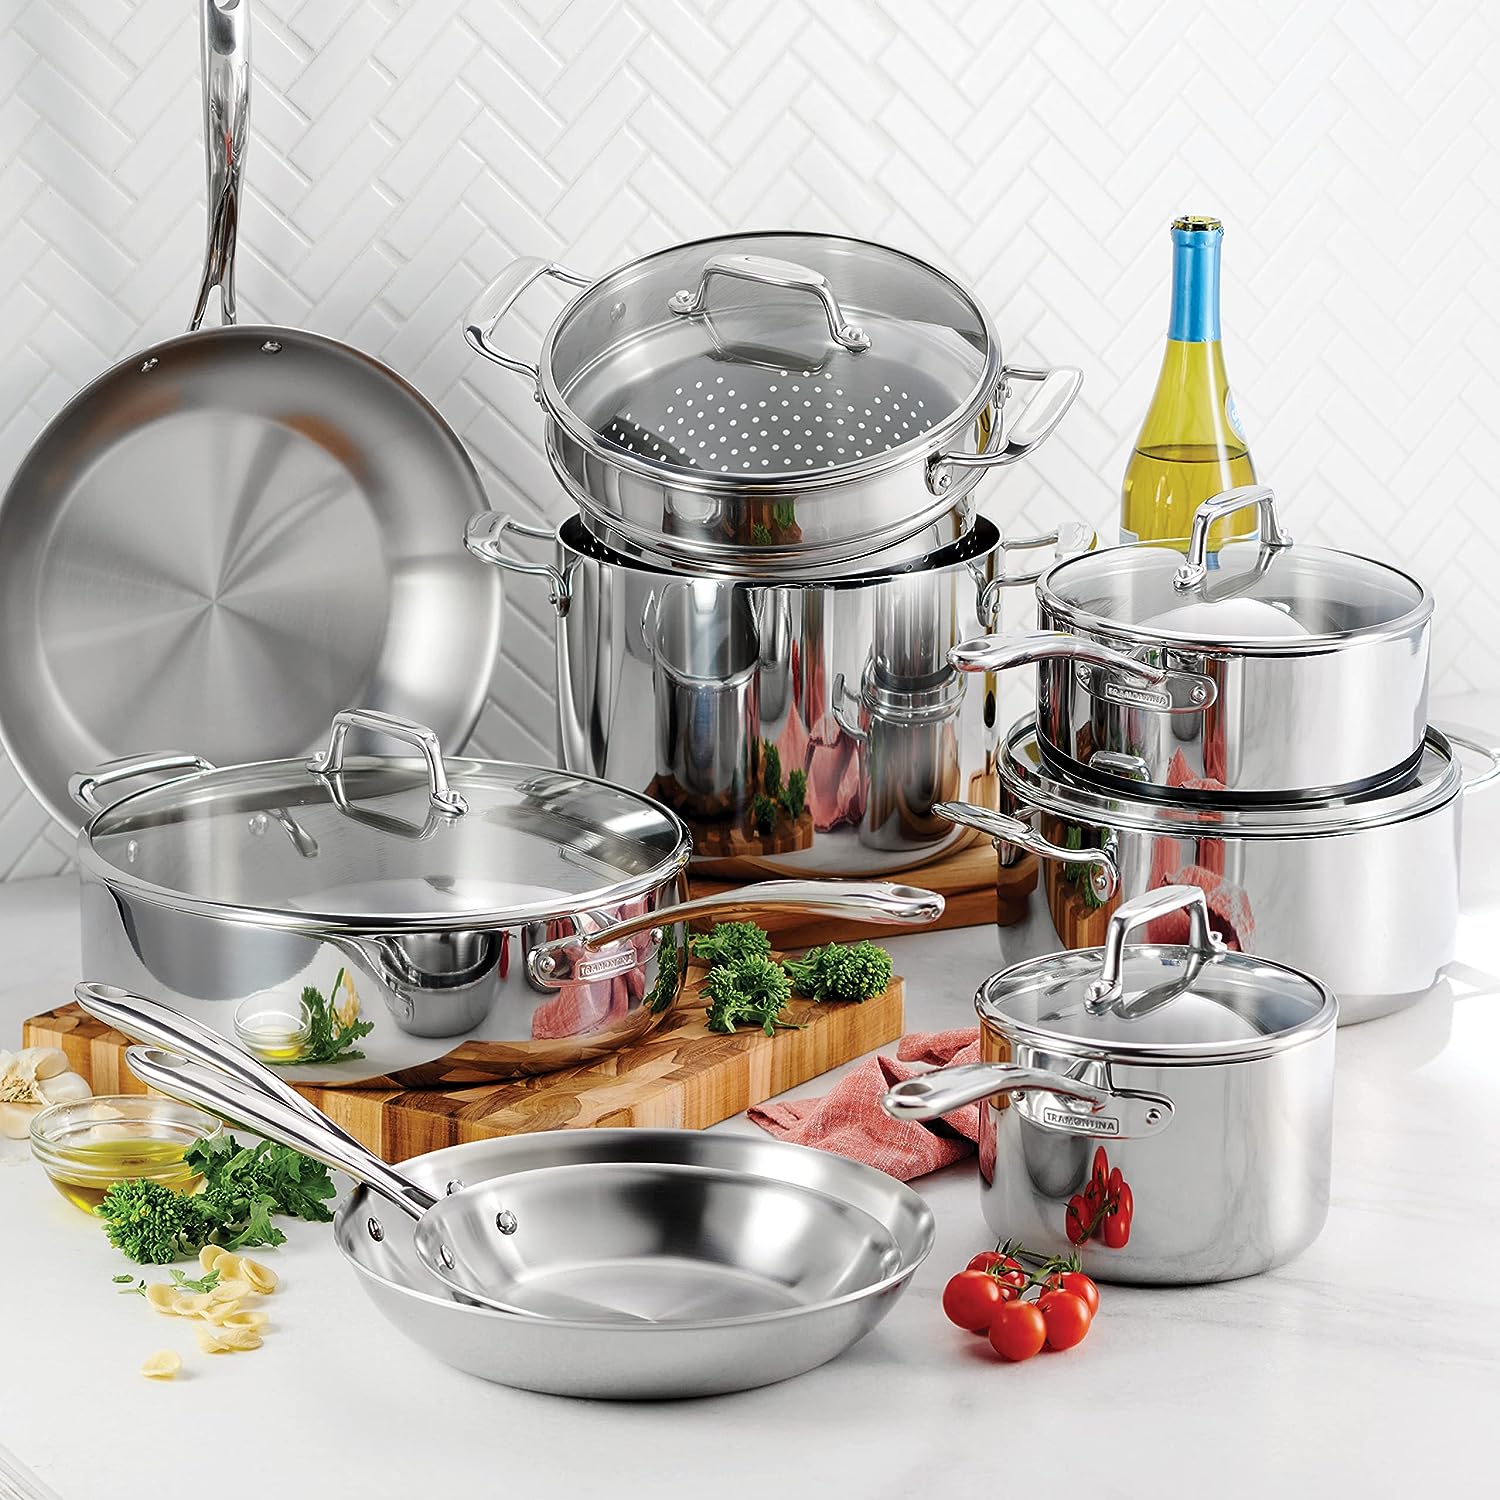 tramontina 14 piece tri ply clad stainless steel cookware set